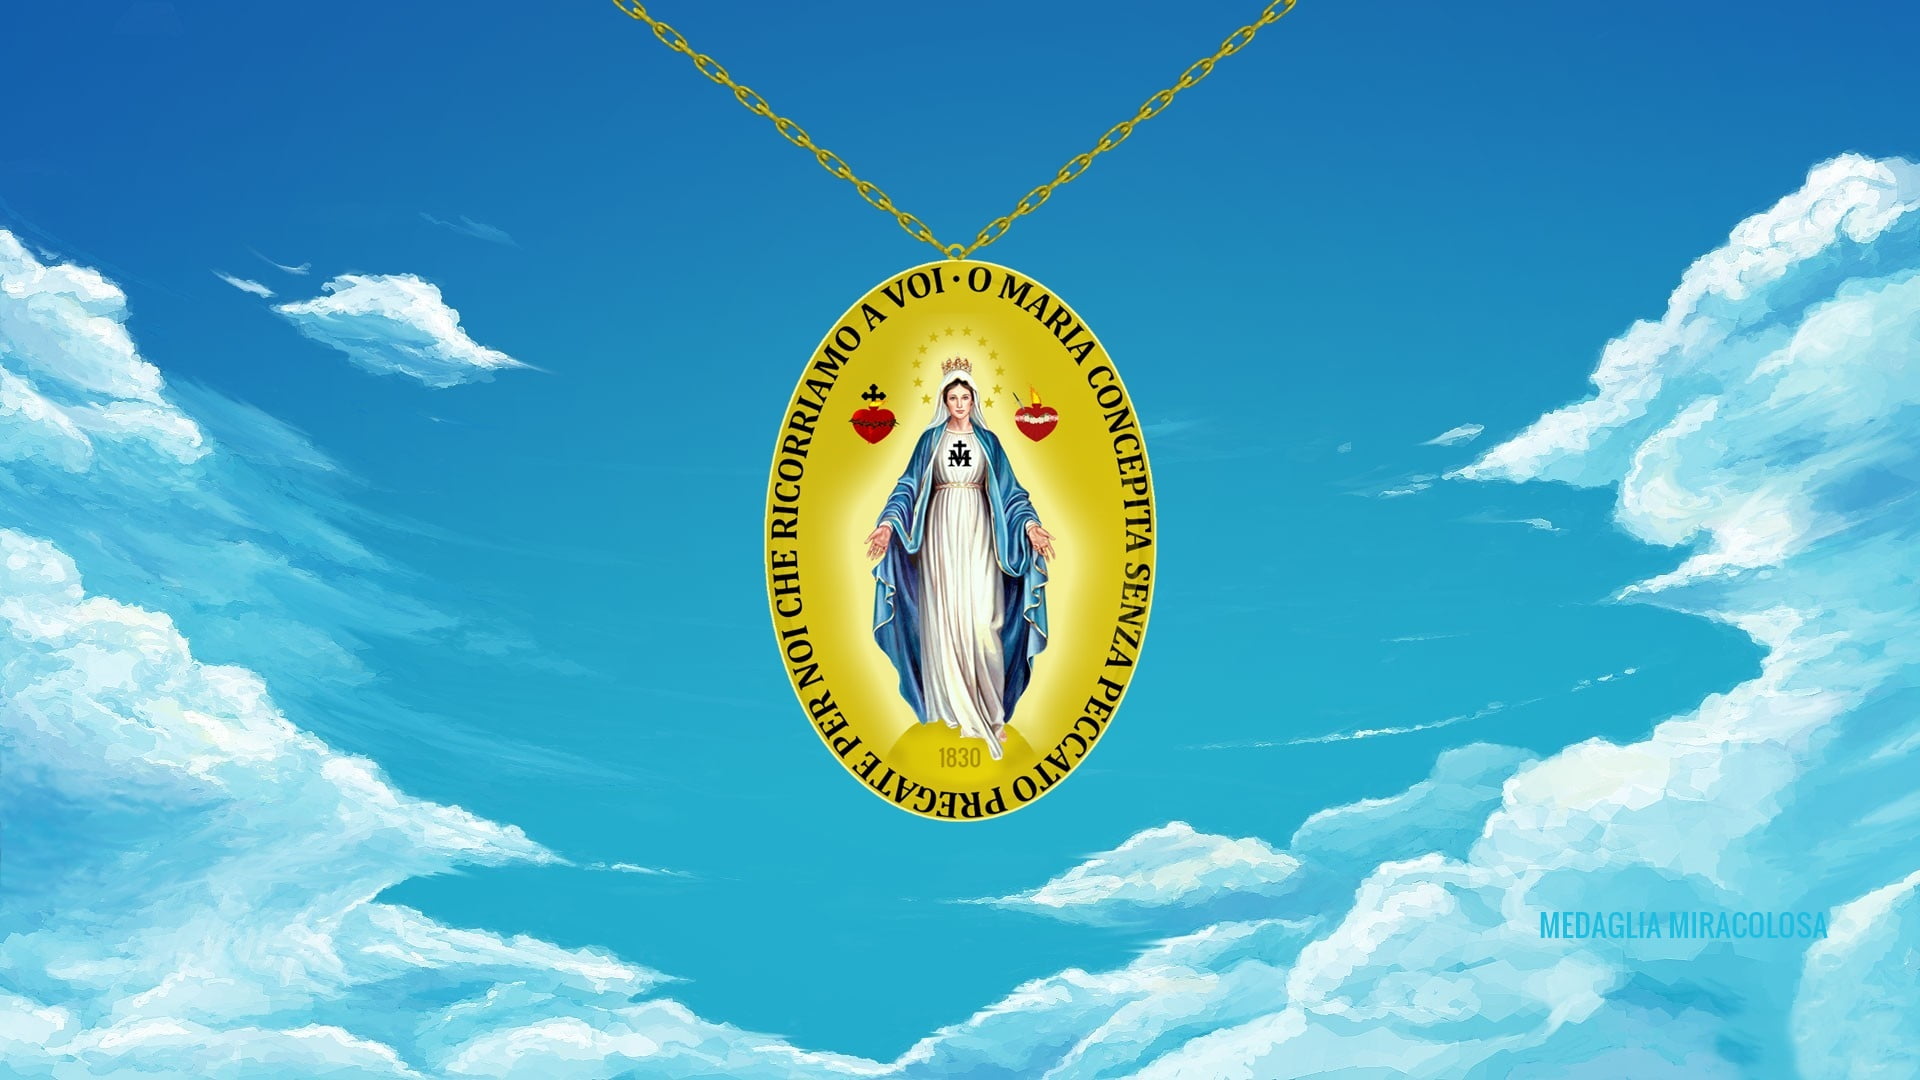 Medals, sky, clouds, gold, Virgin Mary, no people, blue, accuracy